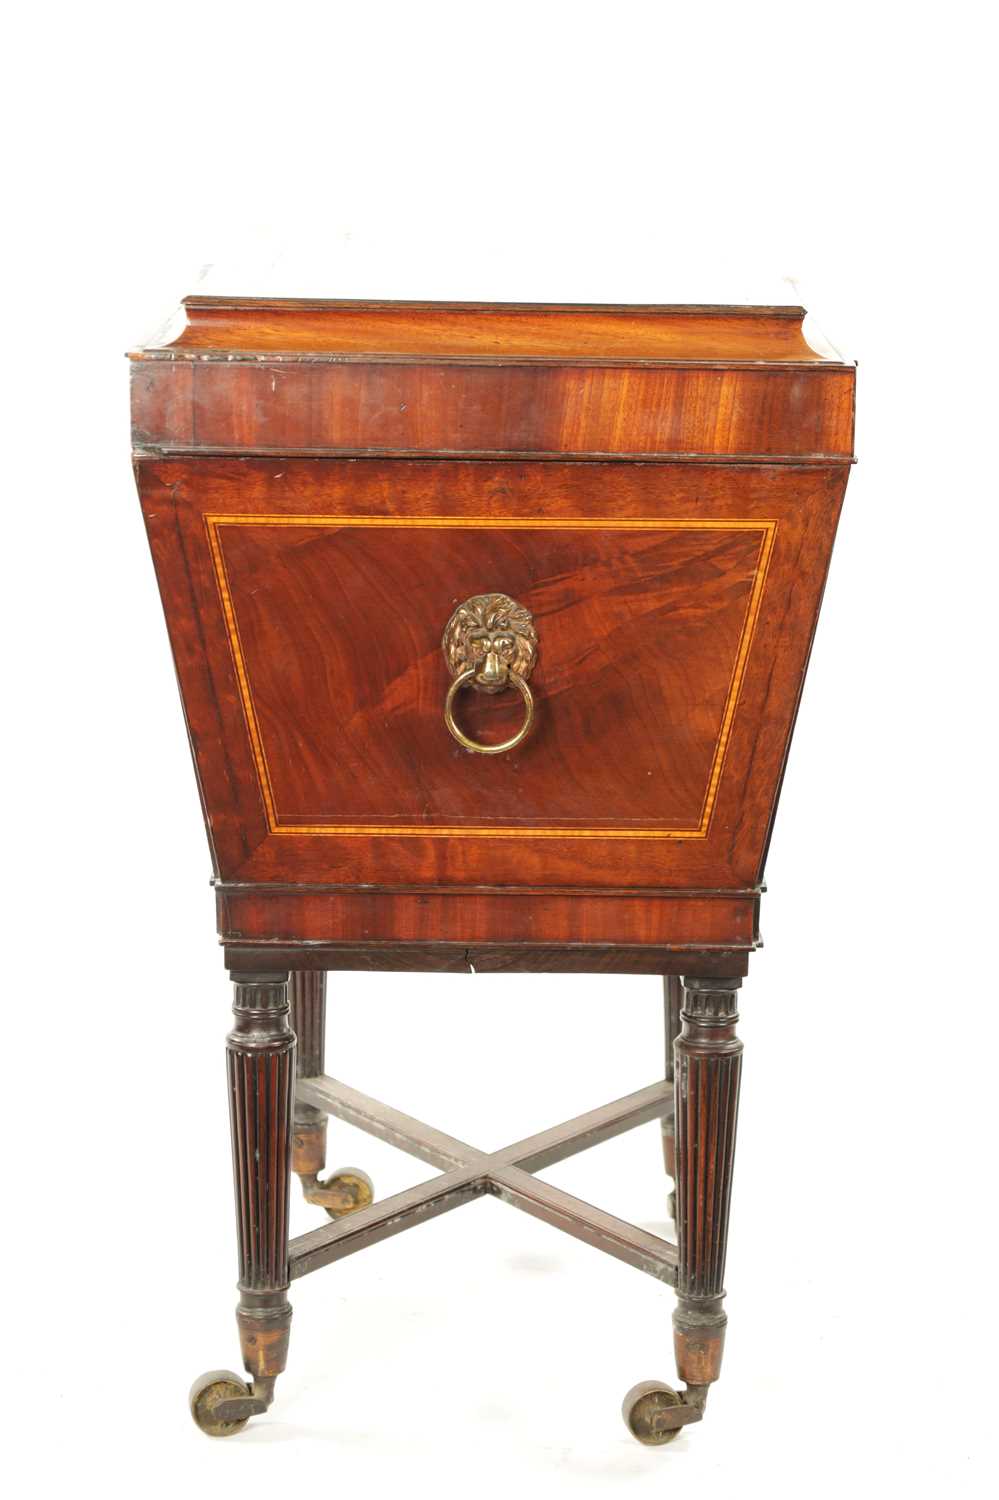 A REGENCY INLAID MAHOGANY CELLARETTE ON TAPERED FLUTED LEGS IN THE MANNER OF GILLOWS - Image 12 of 12